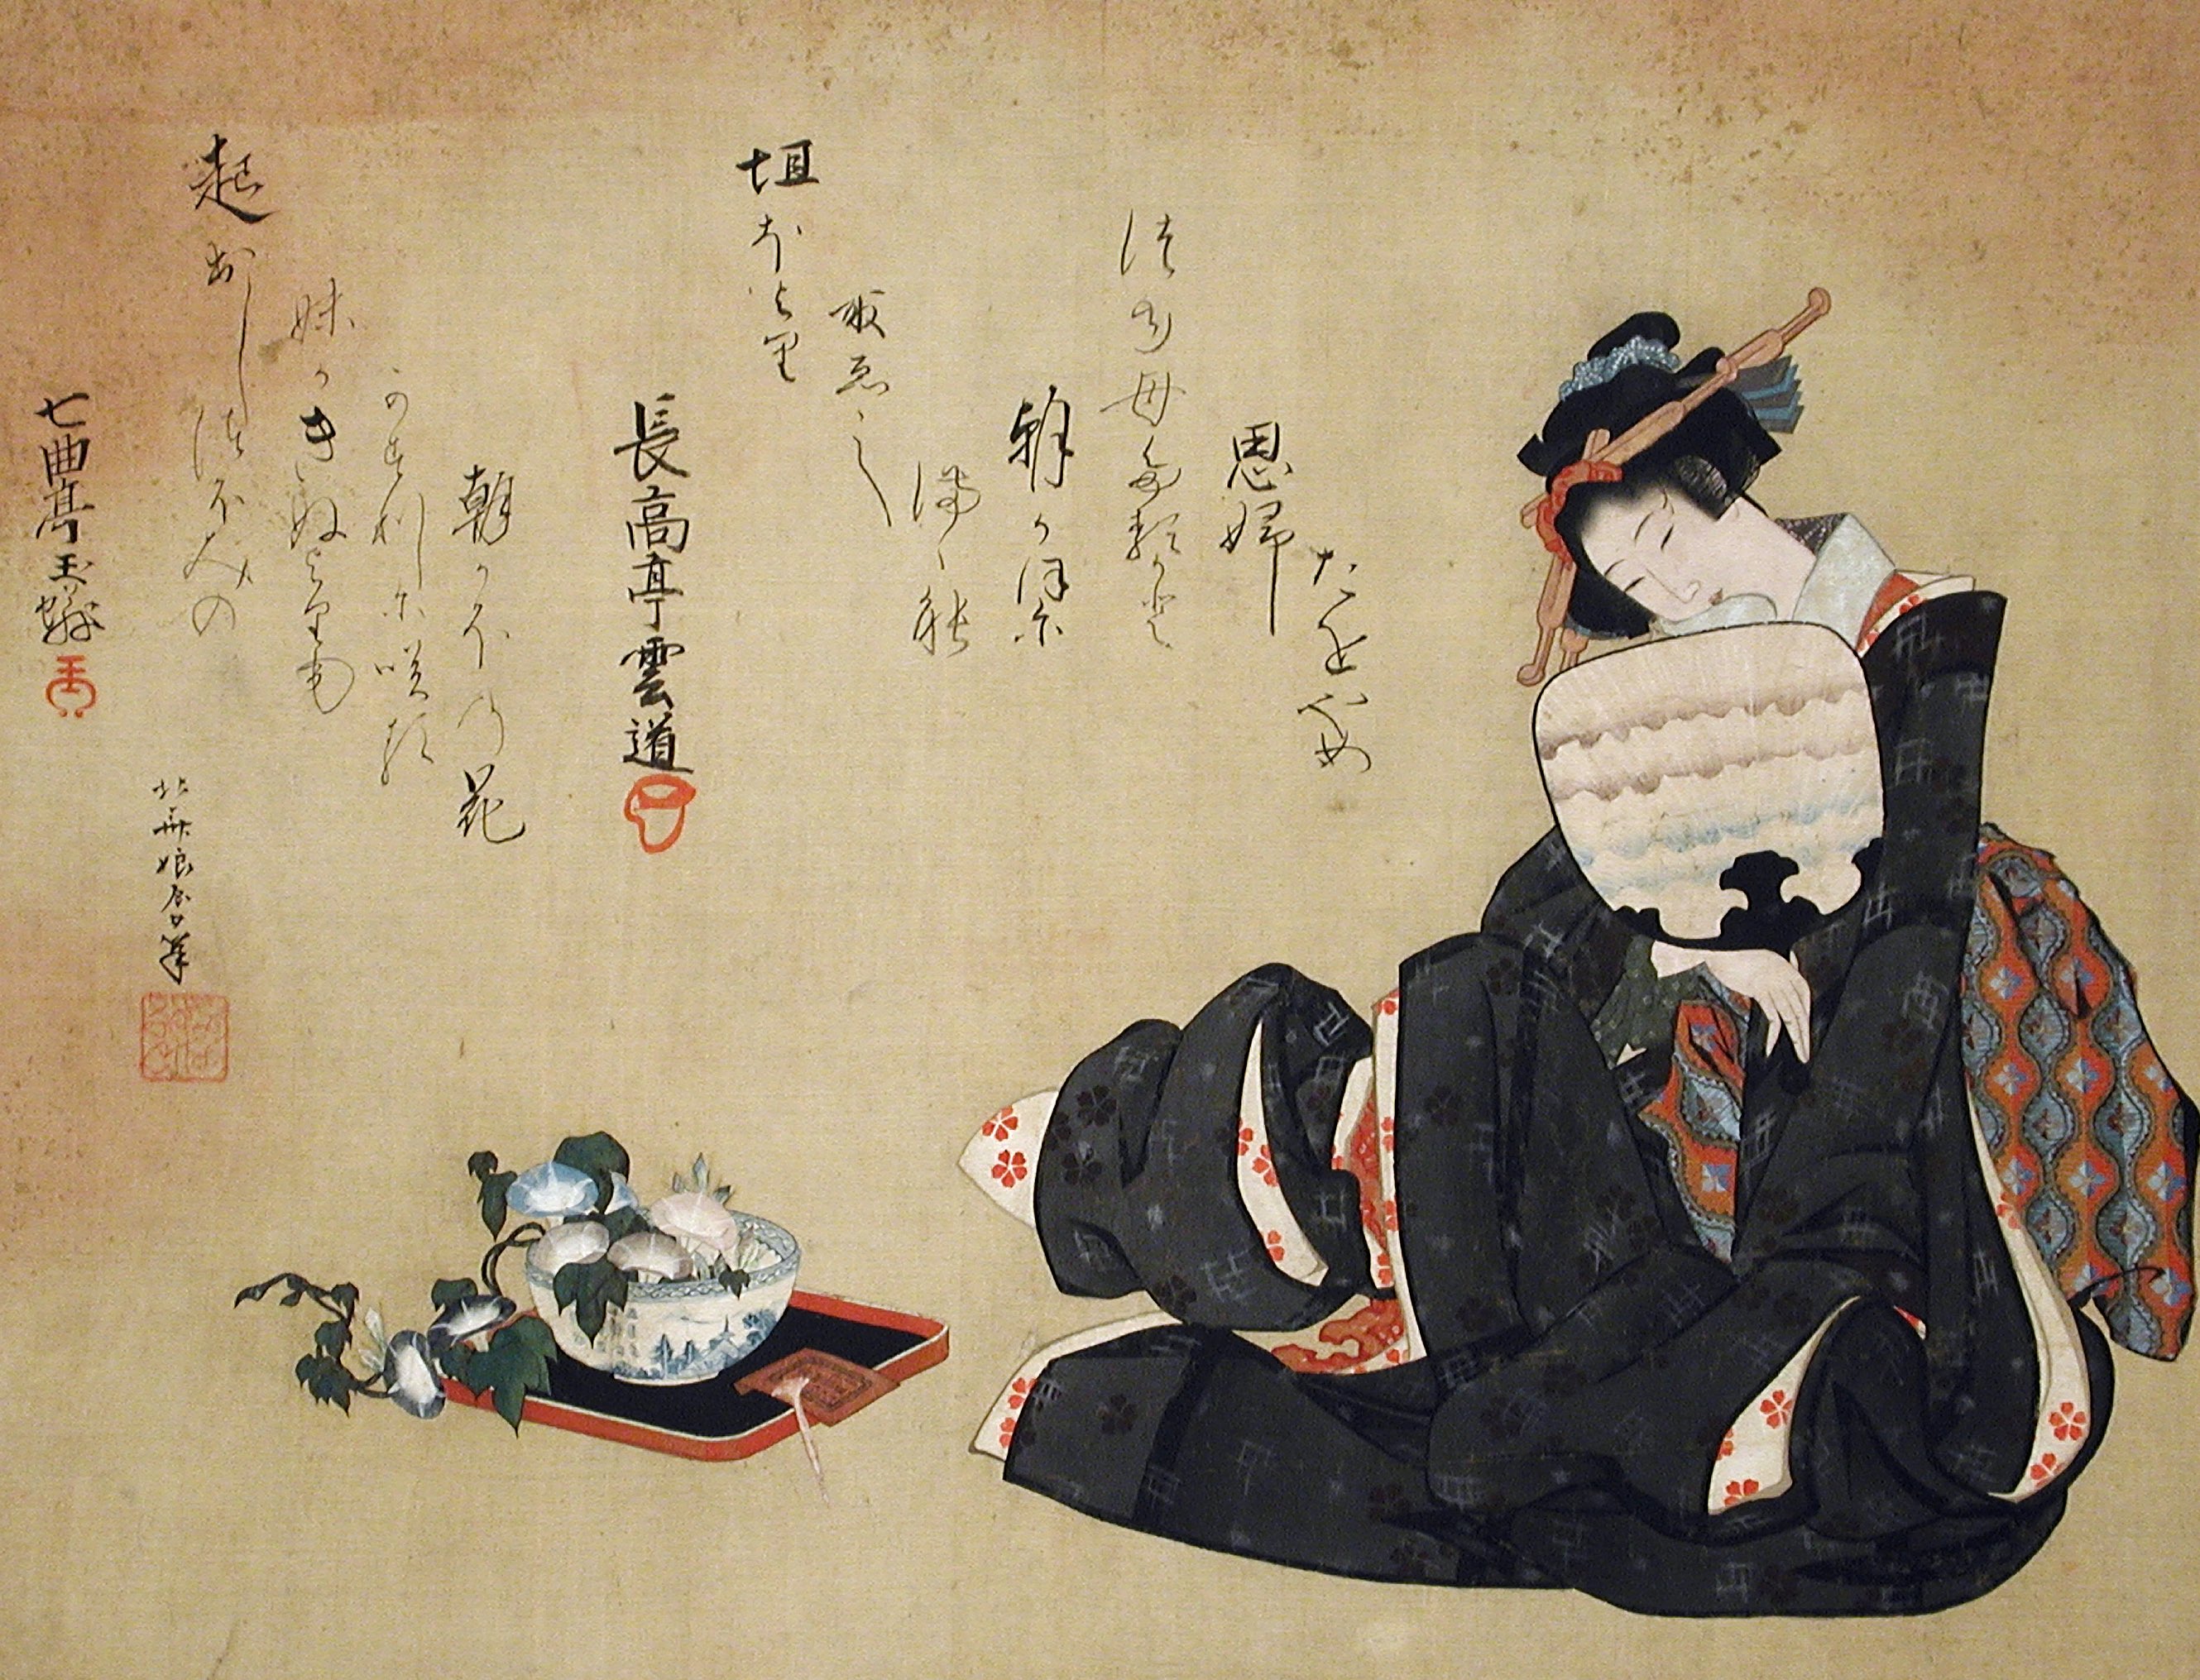 Woman with Morning Glories by Katsushika Ōi - c. 1820s - 34.2 x 44.8 cm LACMA, Los Angeles County Museum of Art